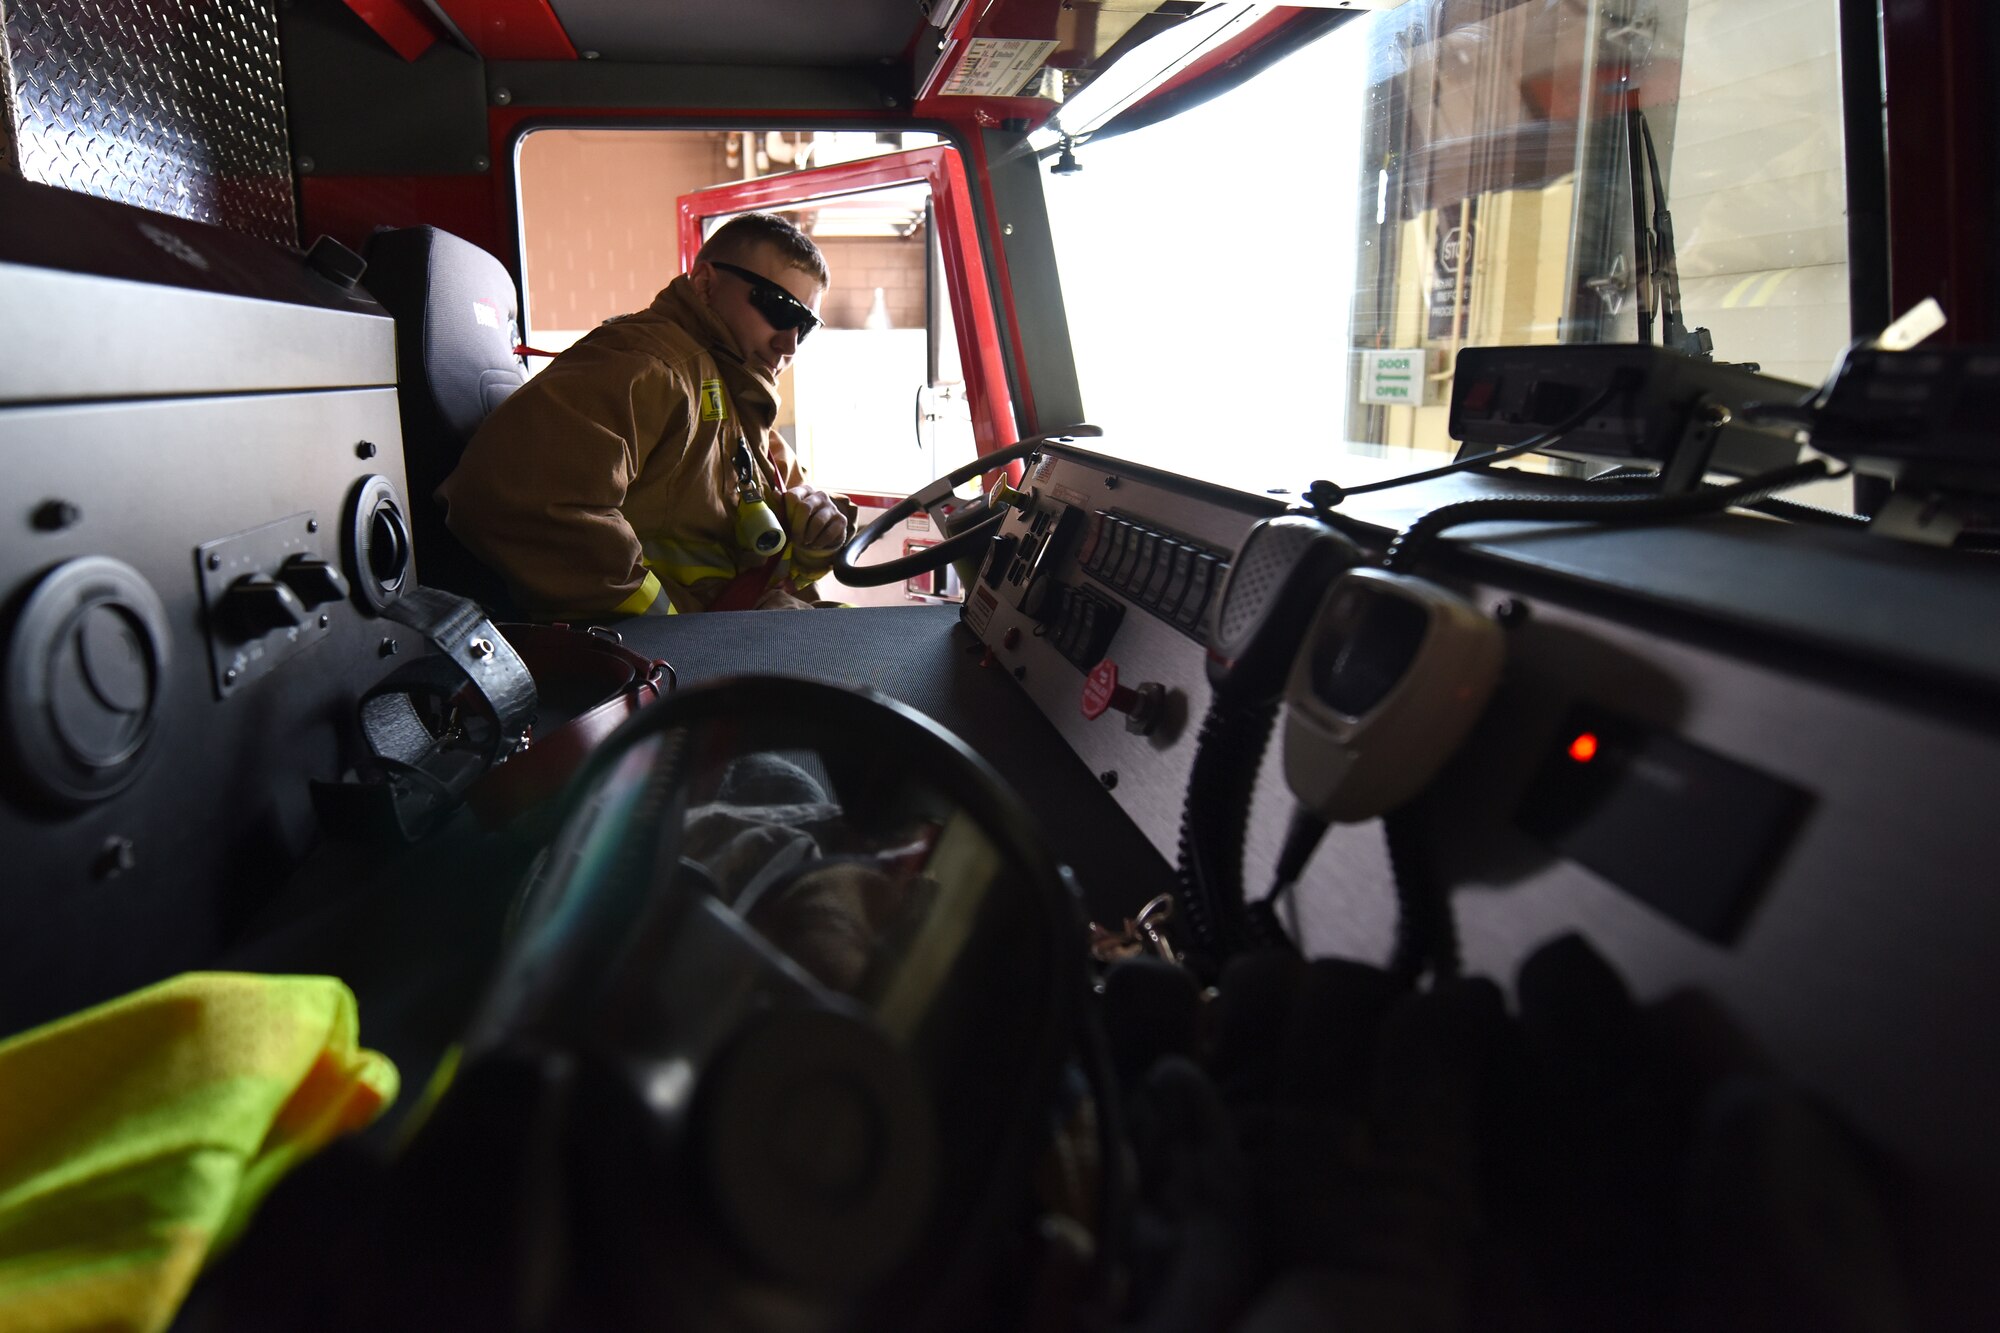 Senior Airman James Weaver, 341st Civil Engineer Squadron fire protection driver, applies his seat belt in preparation to drive a pumper truck to a practice emergency scene April 23, 2015, at Malmstrom Air Force Base, Mont. The Malmstrom Fire Emergency Services Flight provides an all-hazards emergency response capability, along with command and control for the base. (U.S. Air Force photo/Chris Willis)